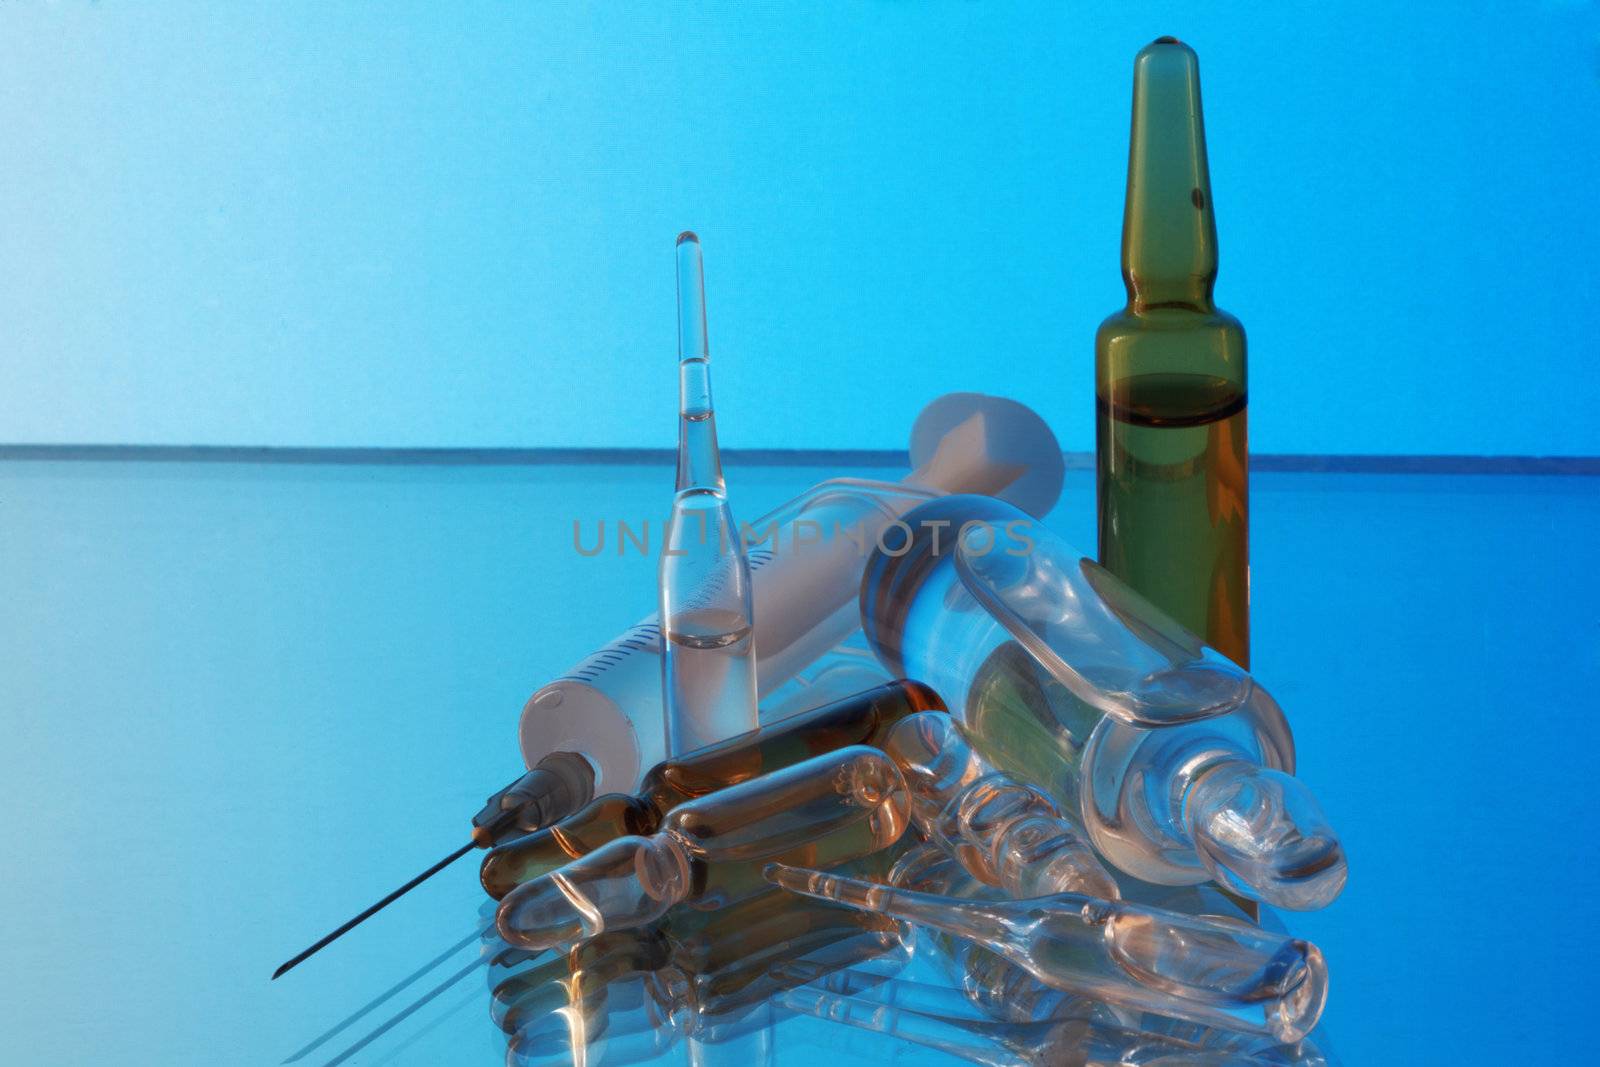 Medicine. Ampoules and syringe on a blue background